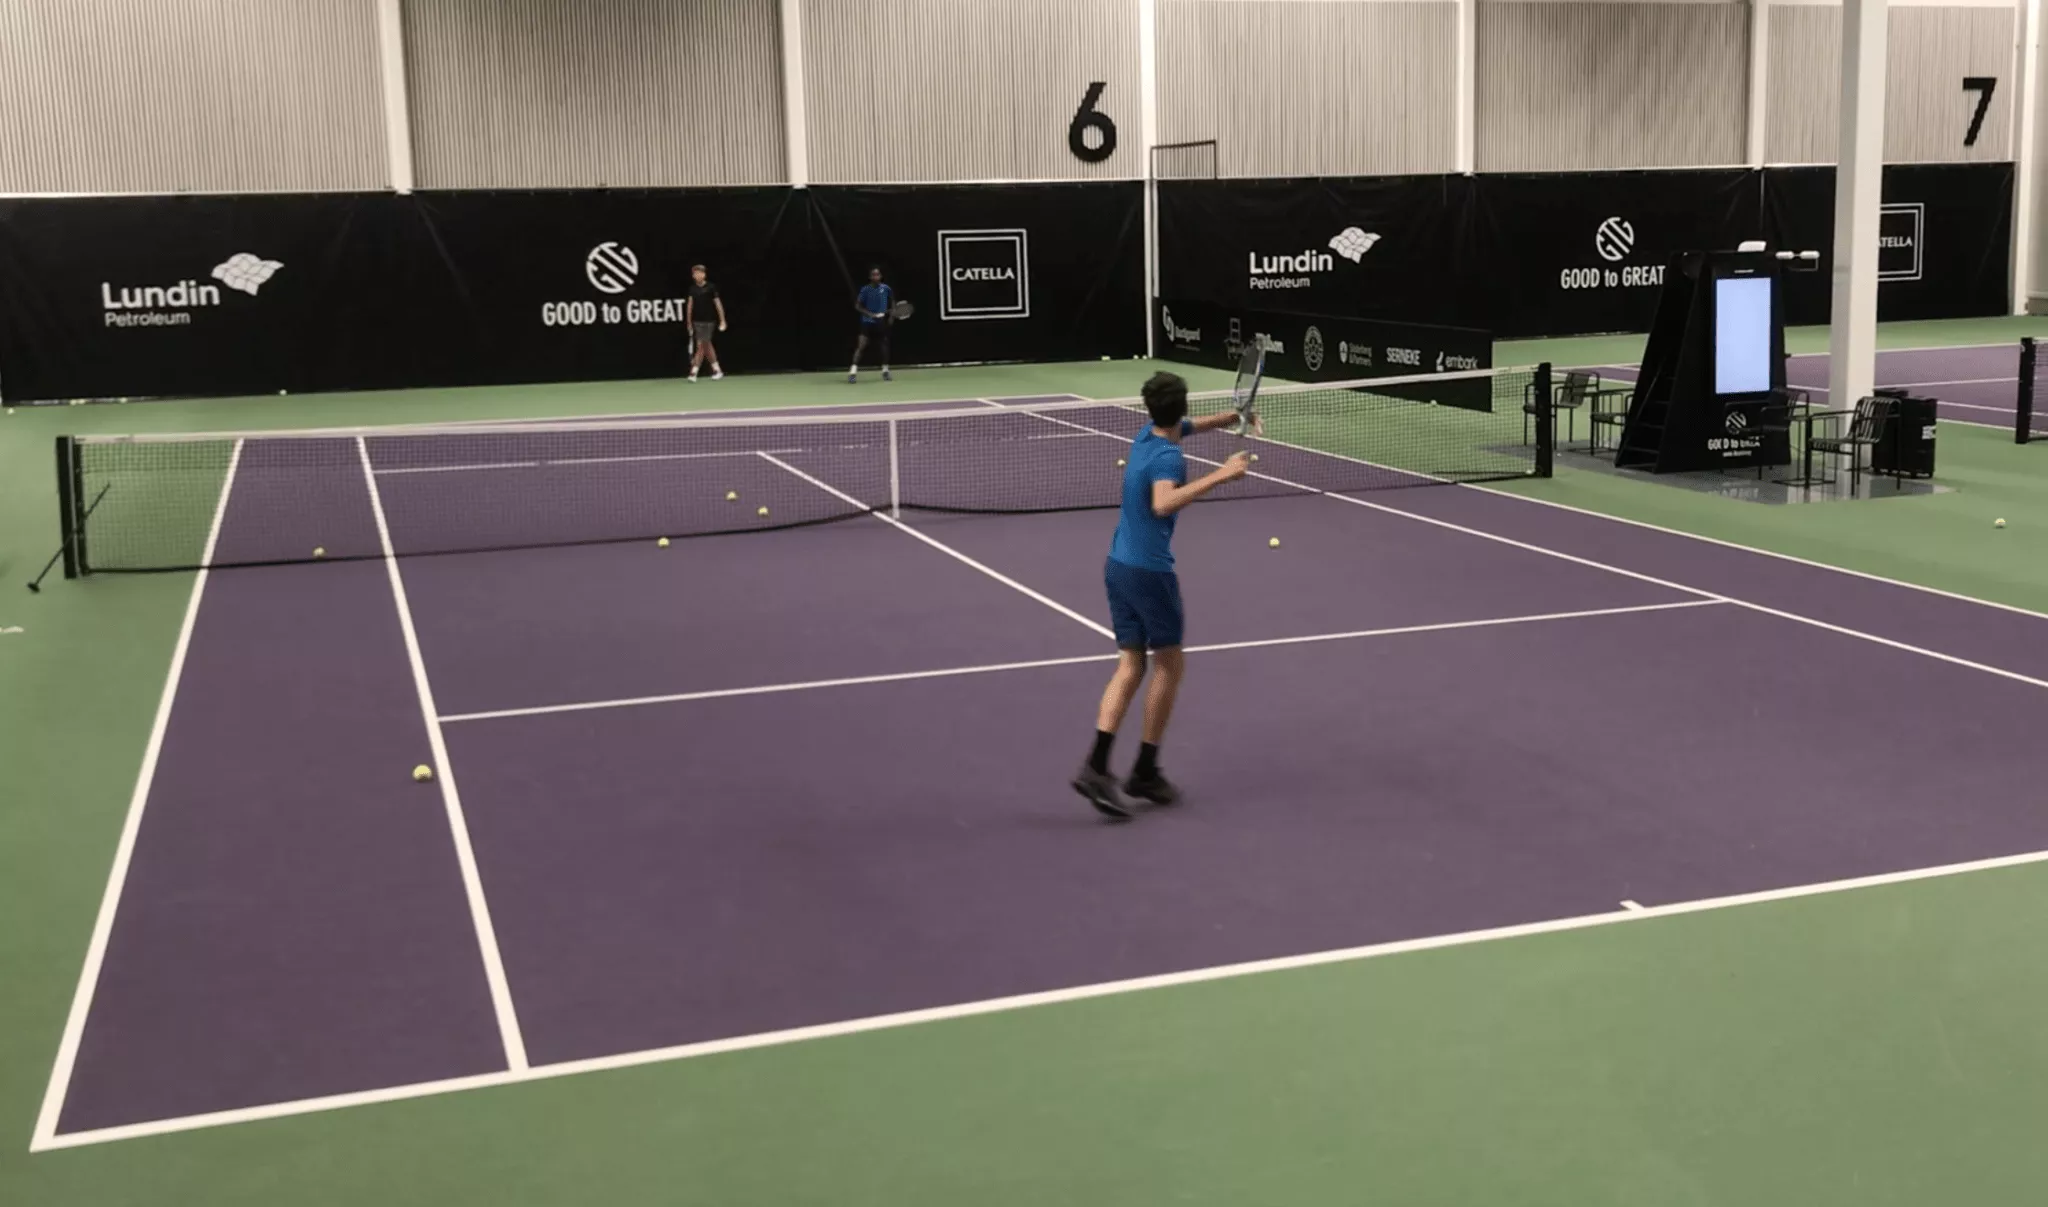 Good To Great Tennis Academy in Sweden, Europe | Tennis - Rated 0.9